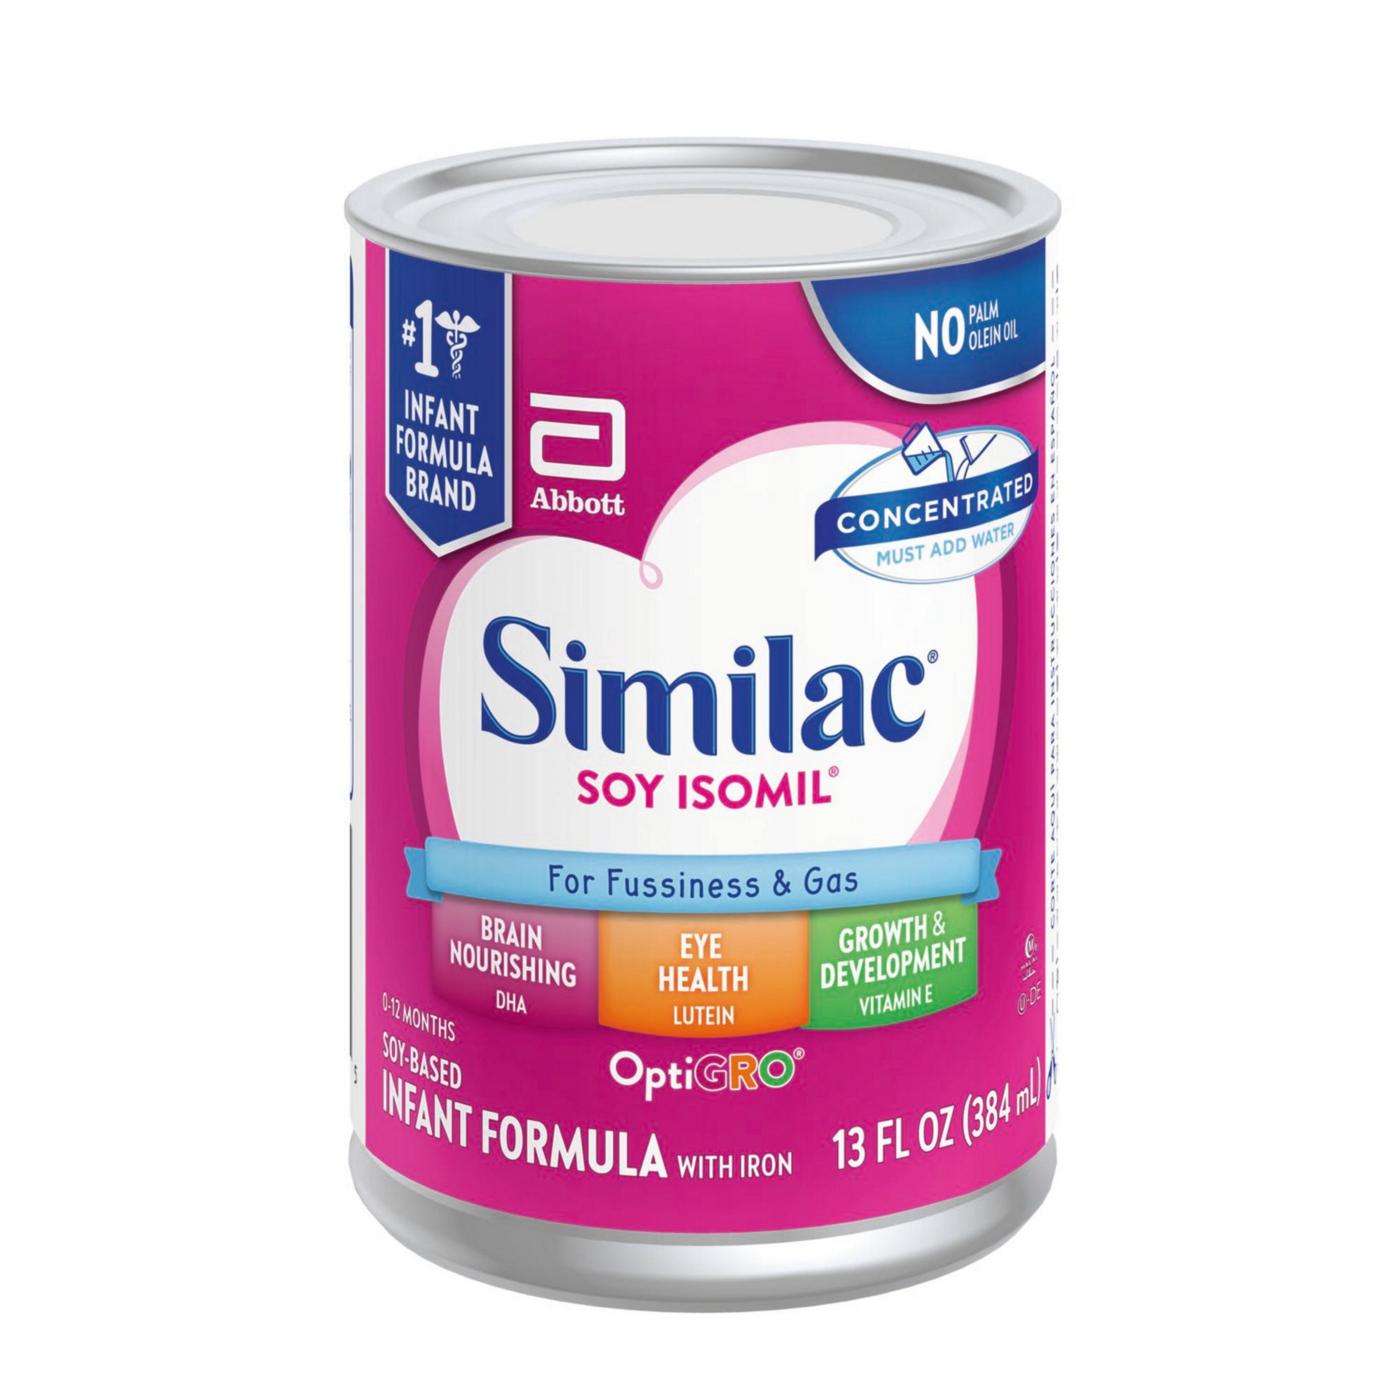 Similac Soy Isomil For Fussiness and Gas Infant Formula with Iron Concentrated Liquid; image 4 of 6